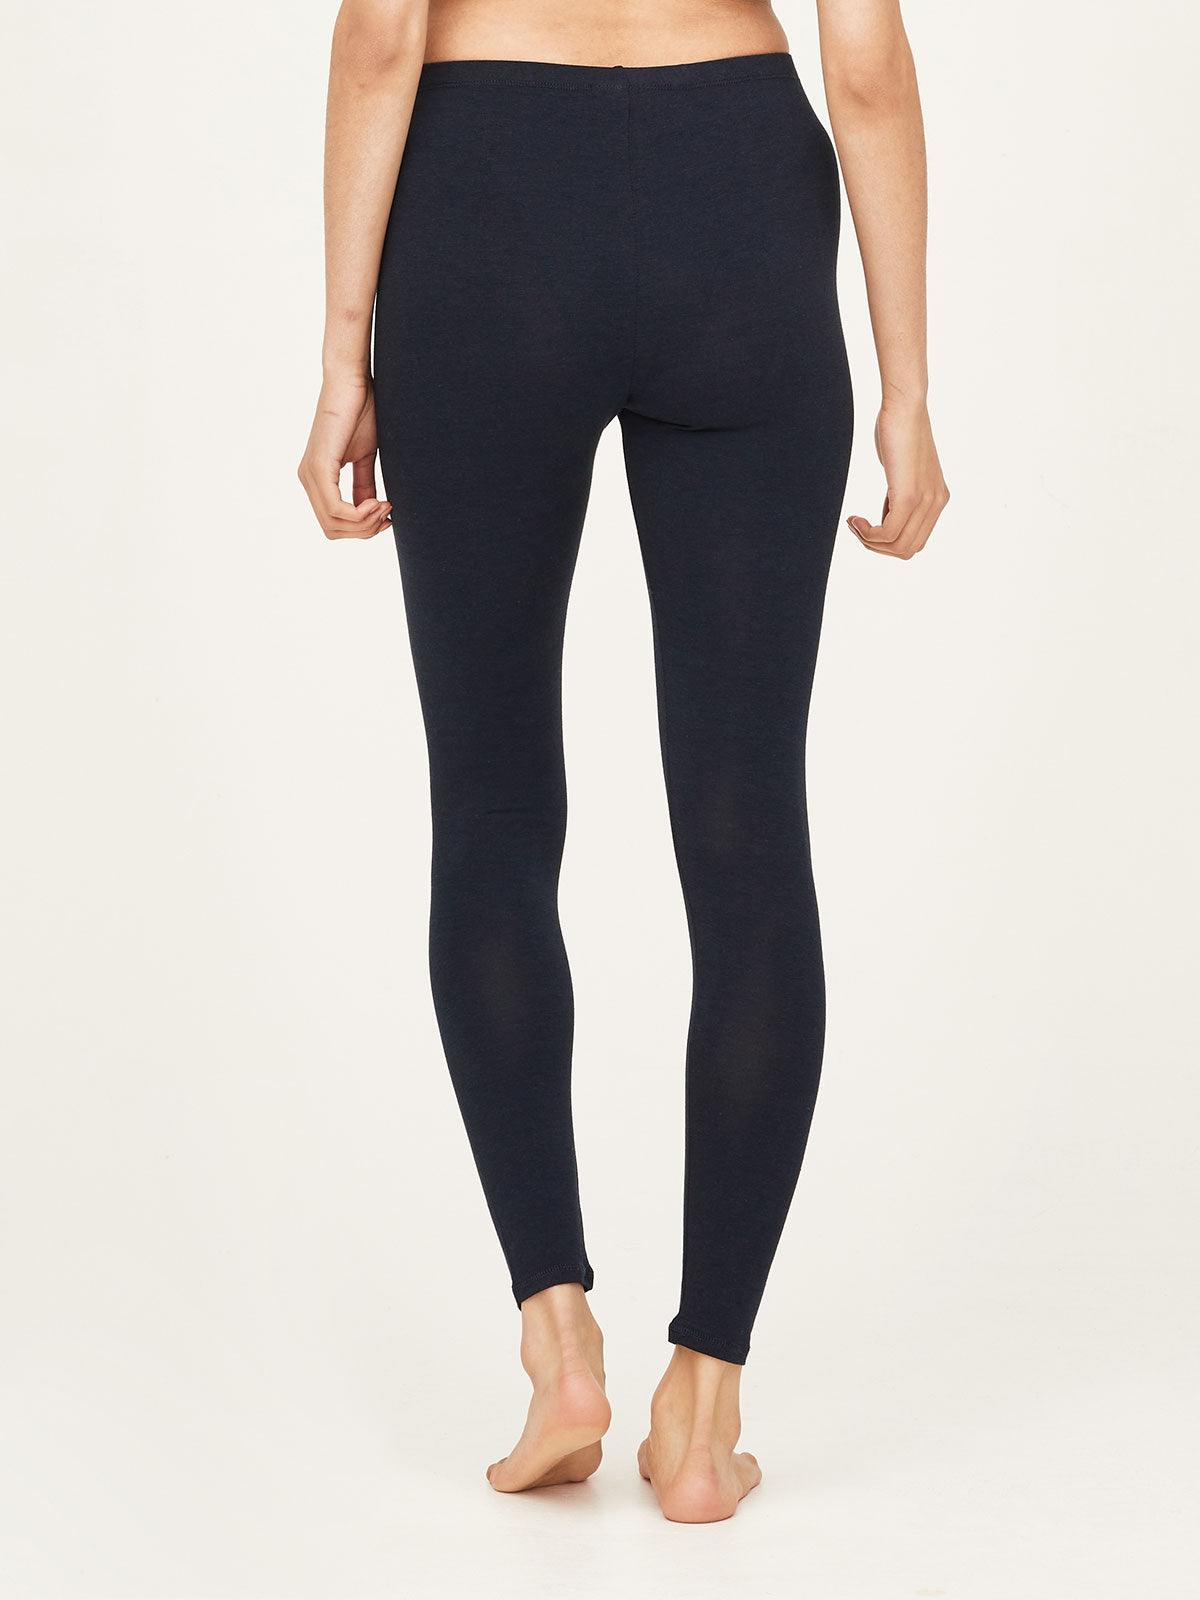 Essential GOTs Organic Cotton Leggings - Navy - Thought Clothing UK